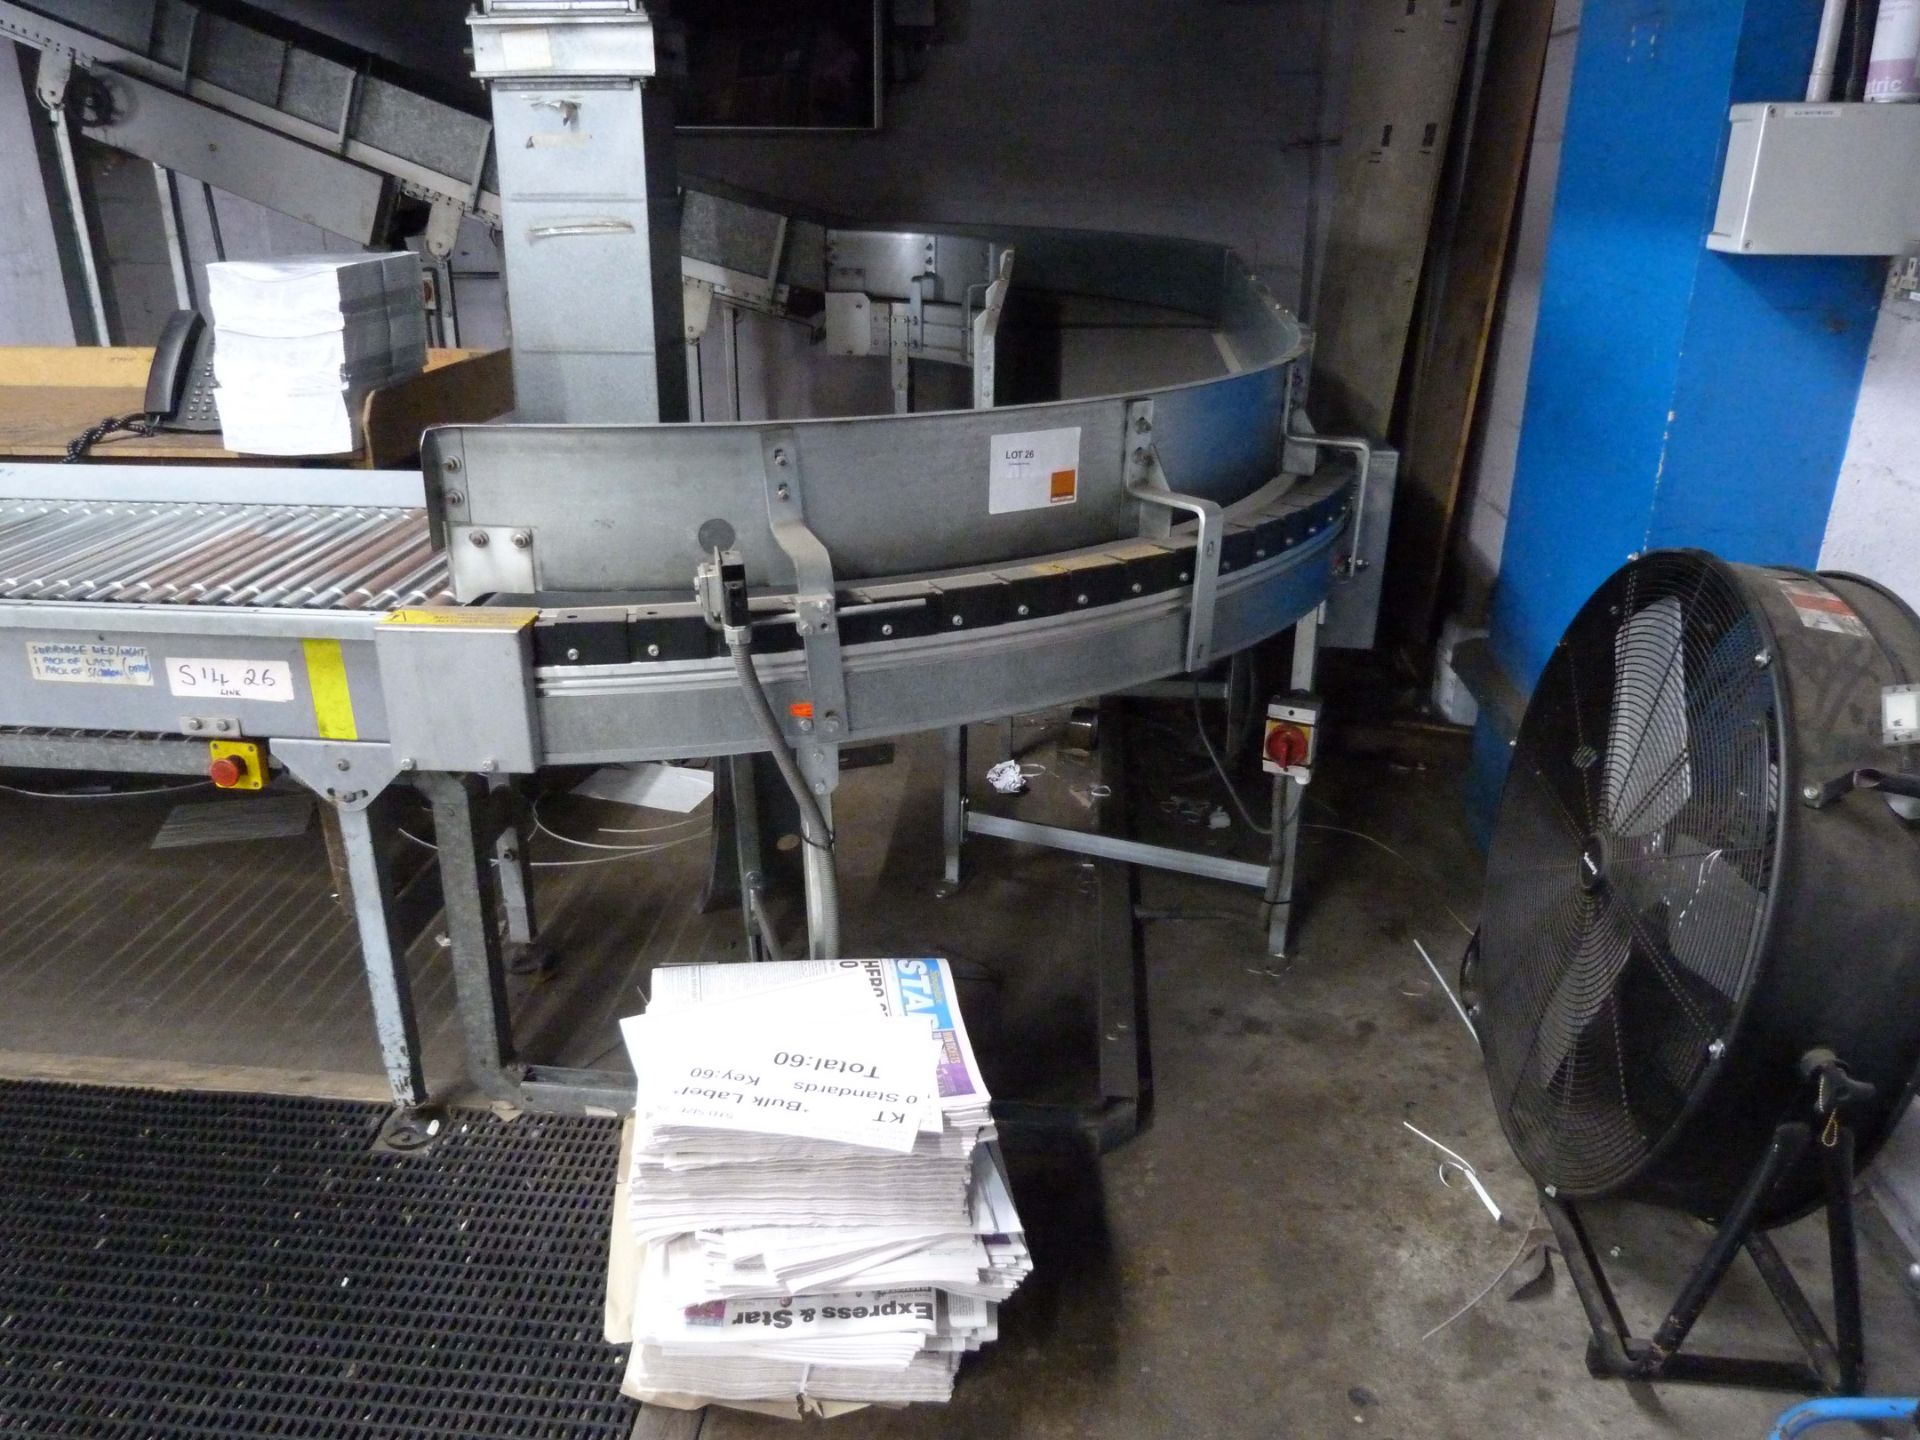 Linked system 2 TRANSNORM Systems Curved Conveyors mod TS1500 80B each 90 deg bend 500 wide with